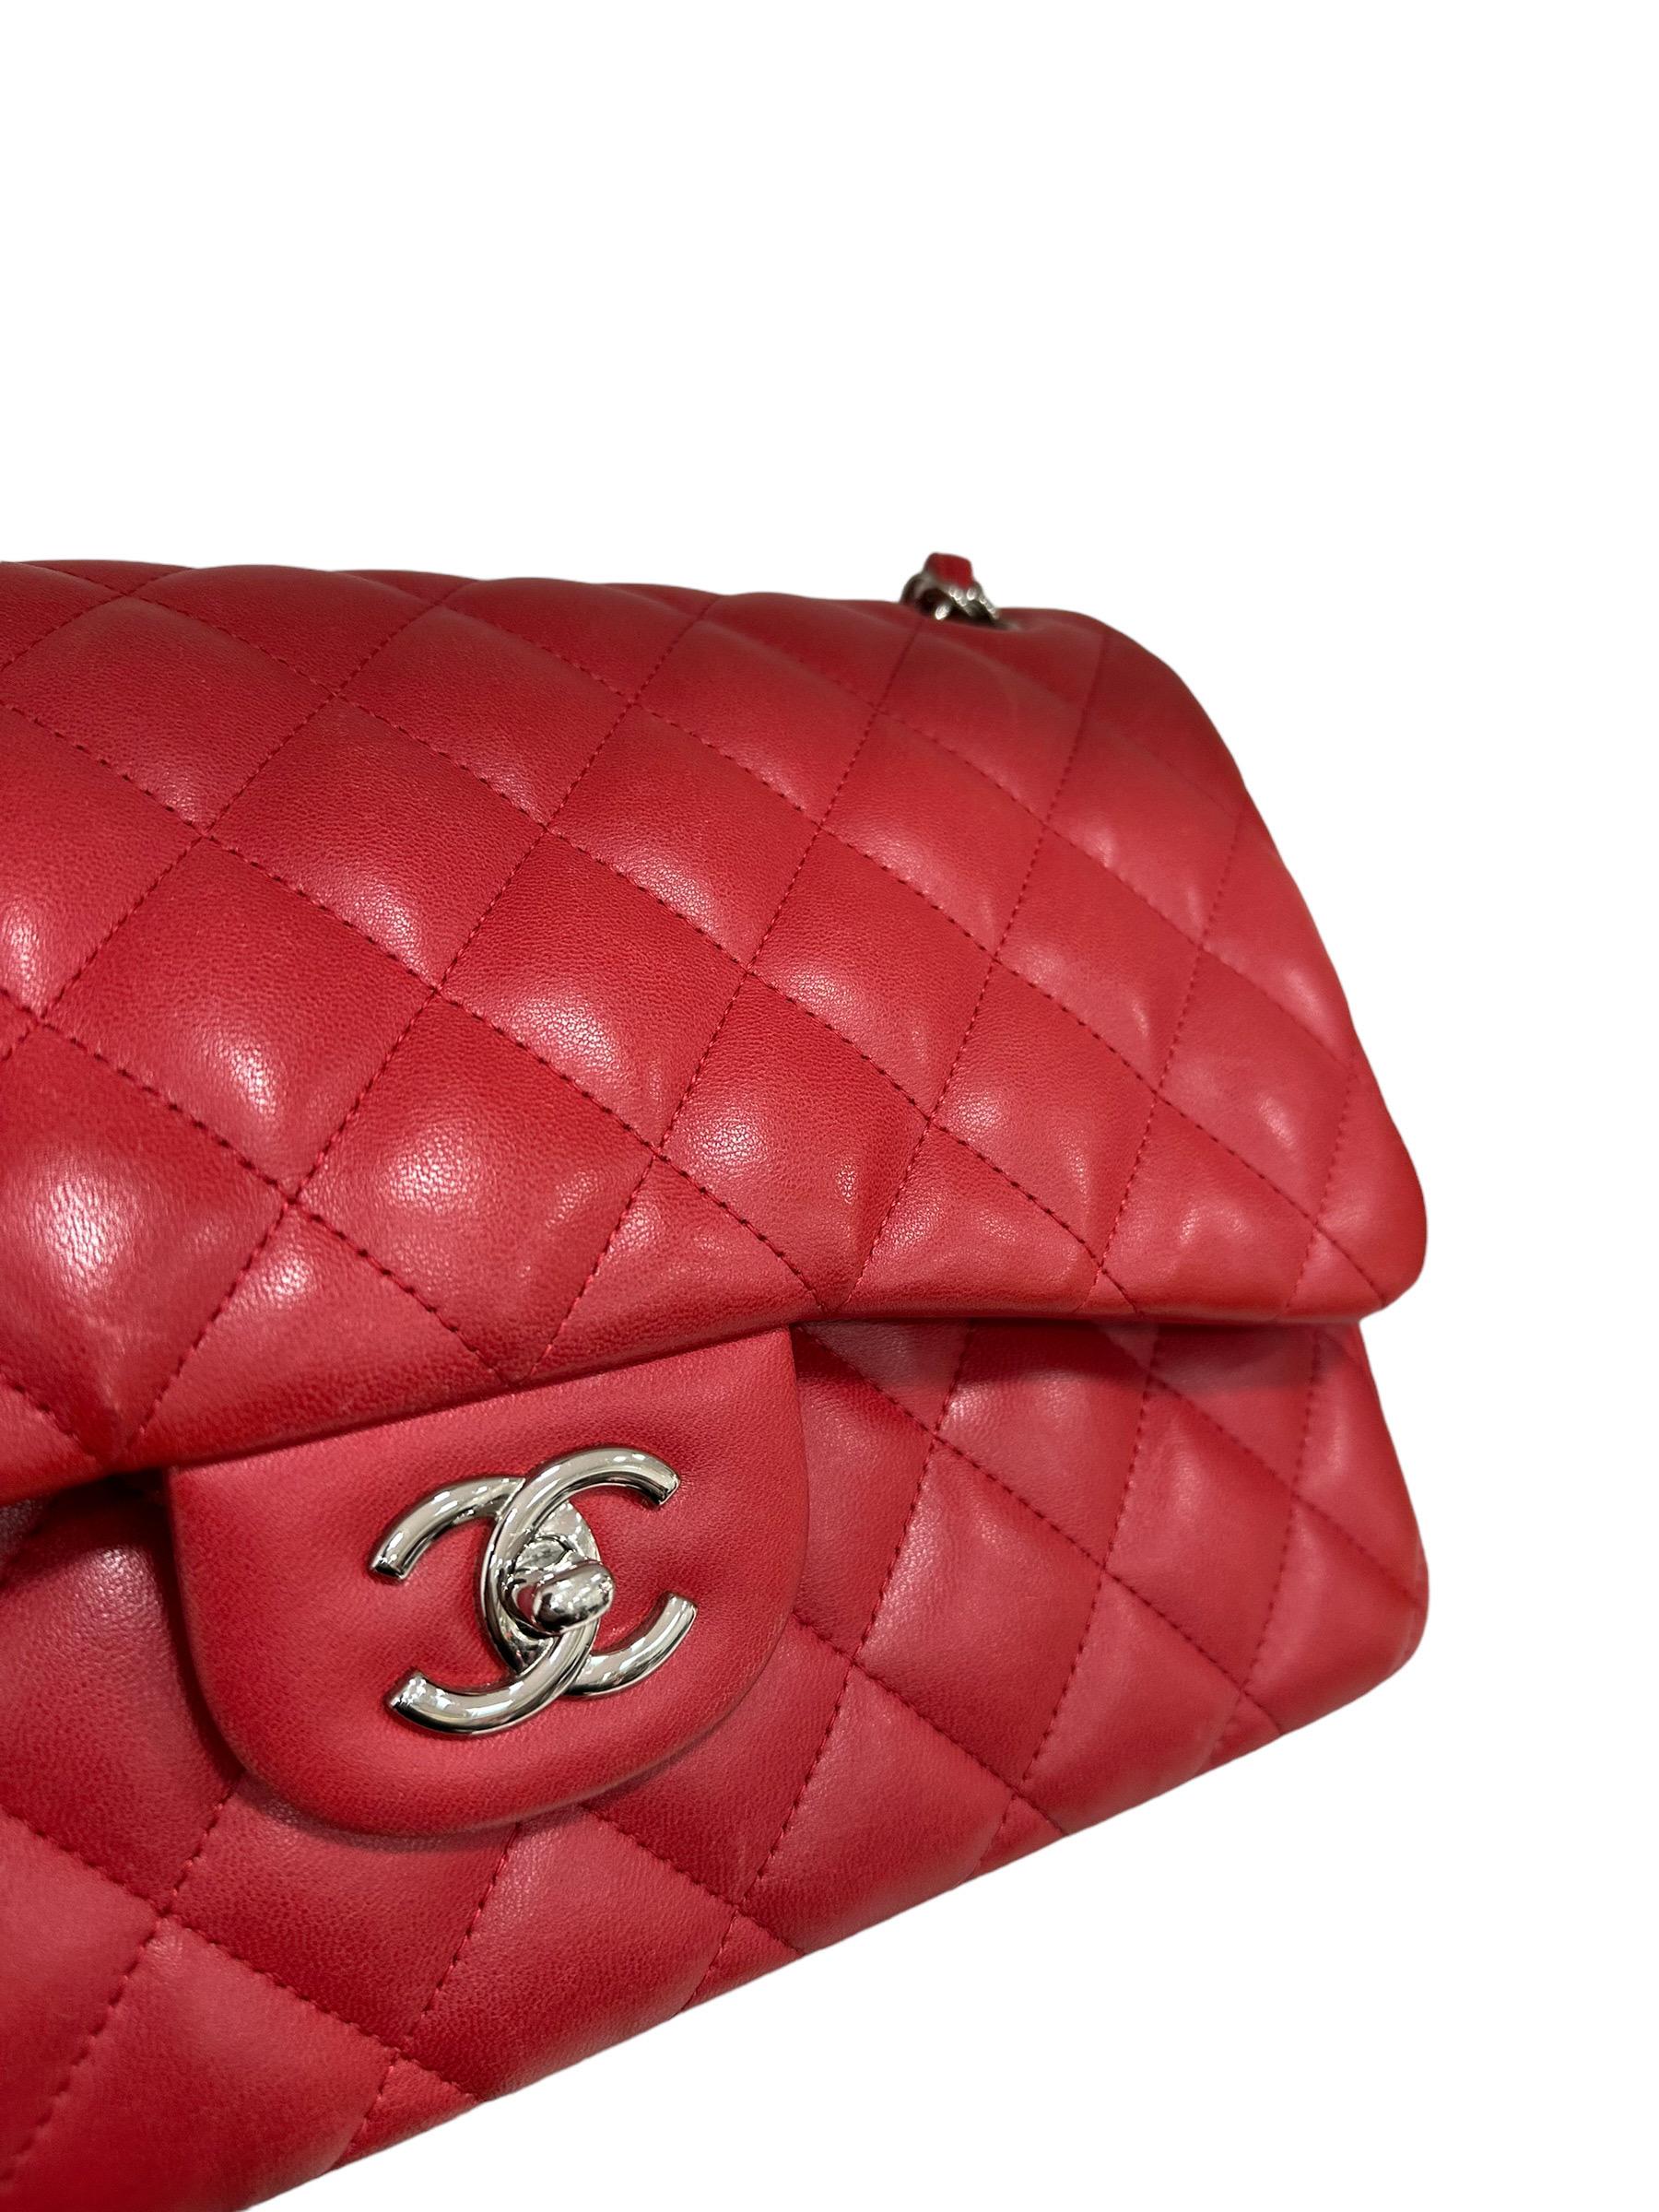 Women's Borsa A Tracolla Chanel Timeless Jumbo Rossa 2013/2014 For Sale